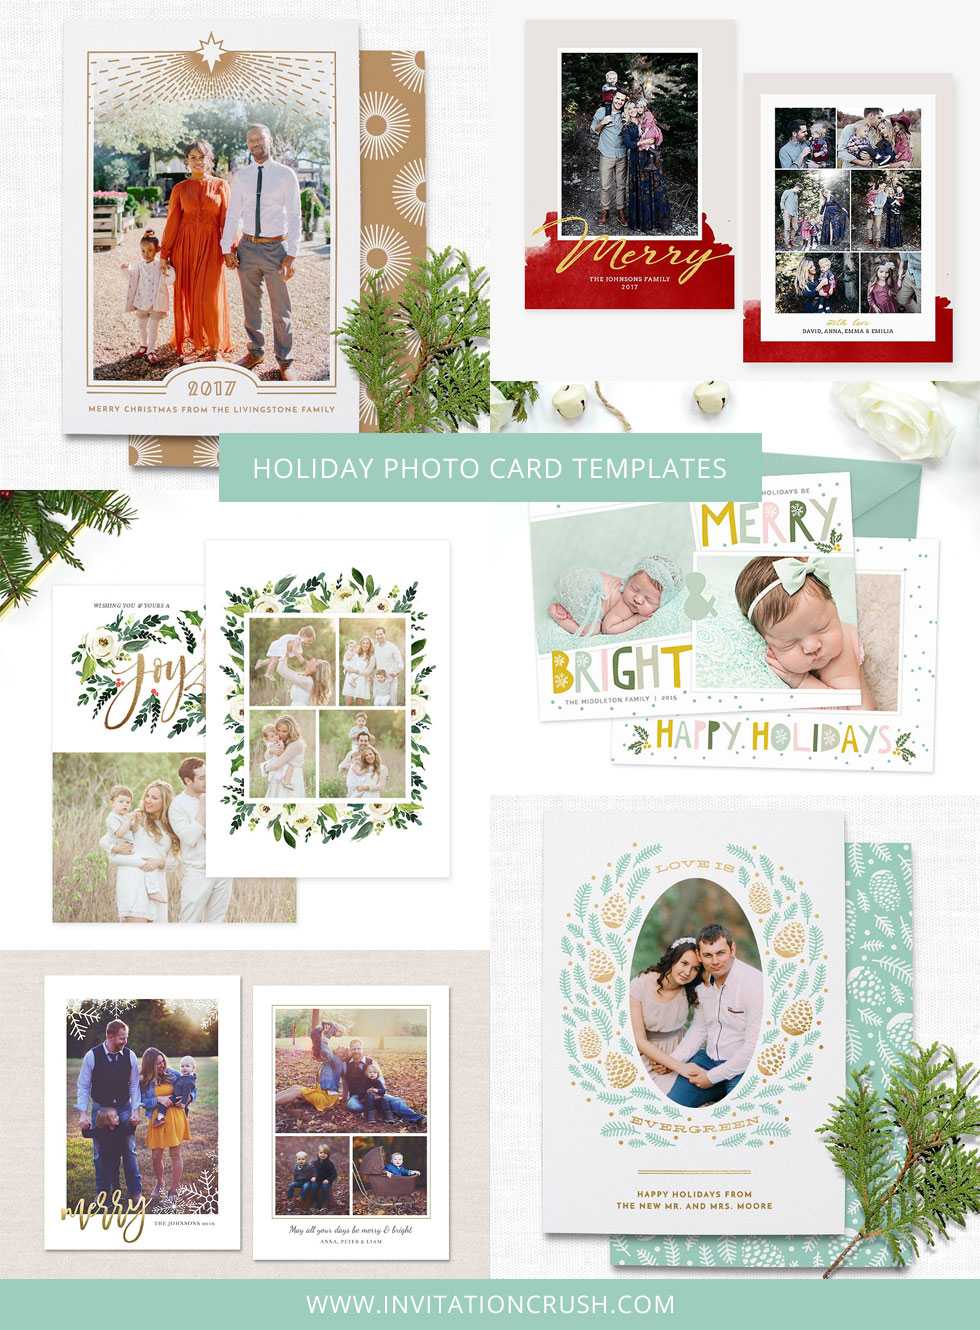 Holiday & Christmas Photo Card Templates For Photographers Intended For Holiday Card Templates For Photographers